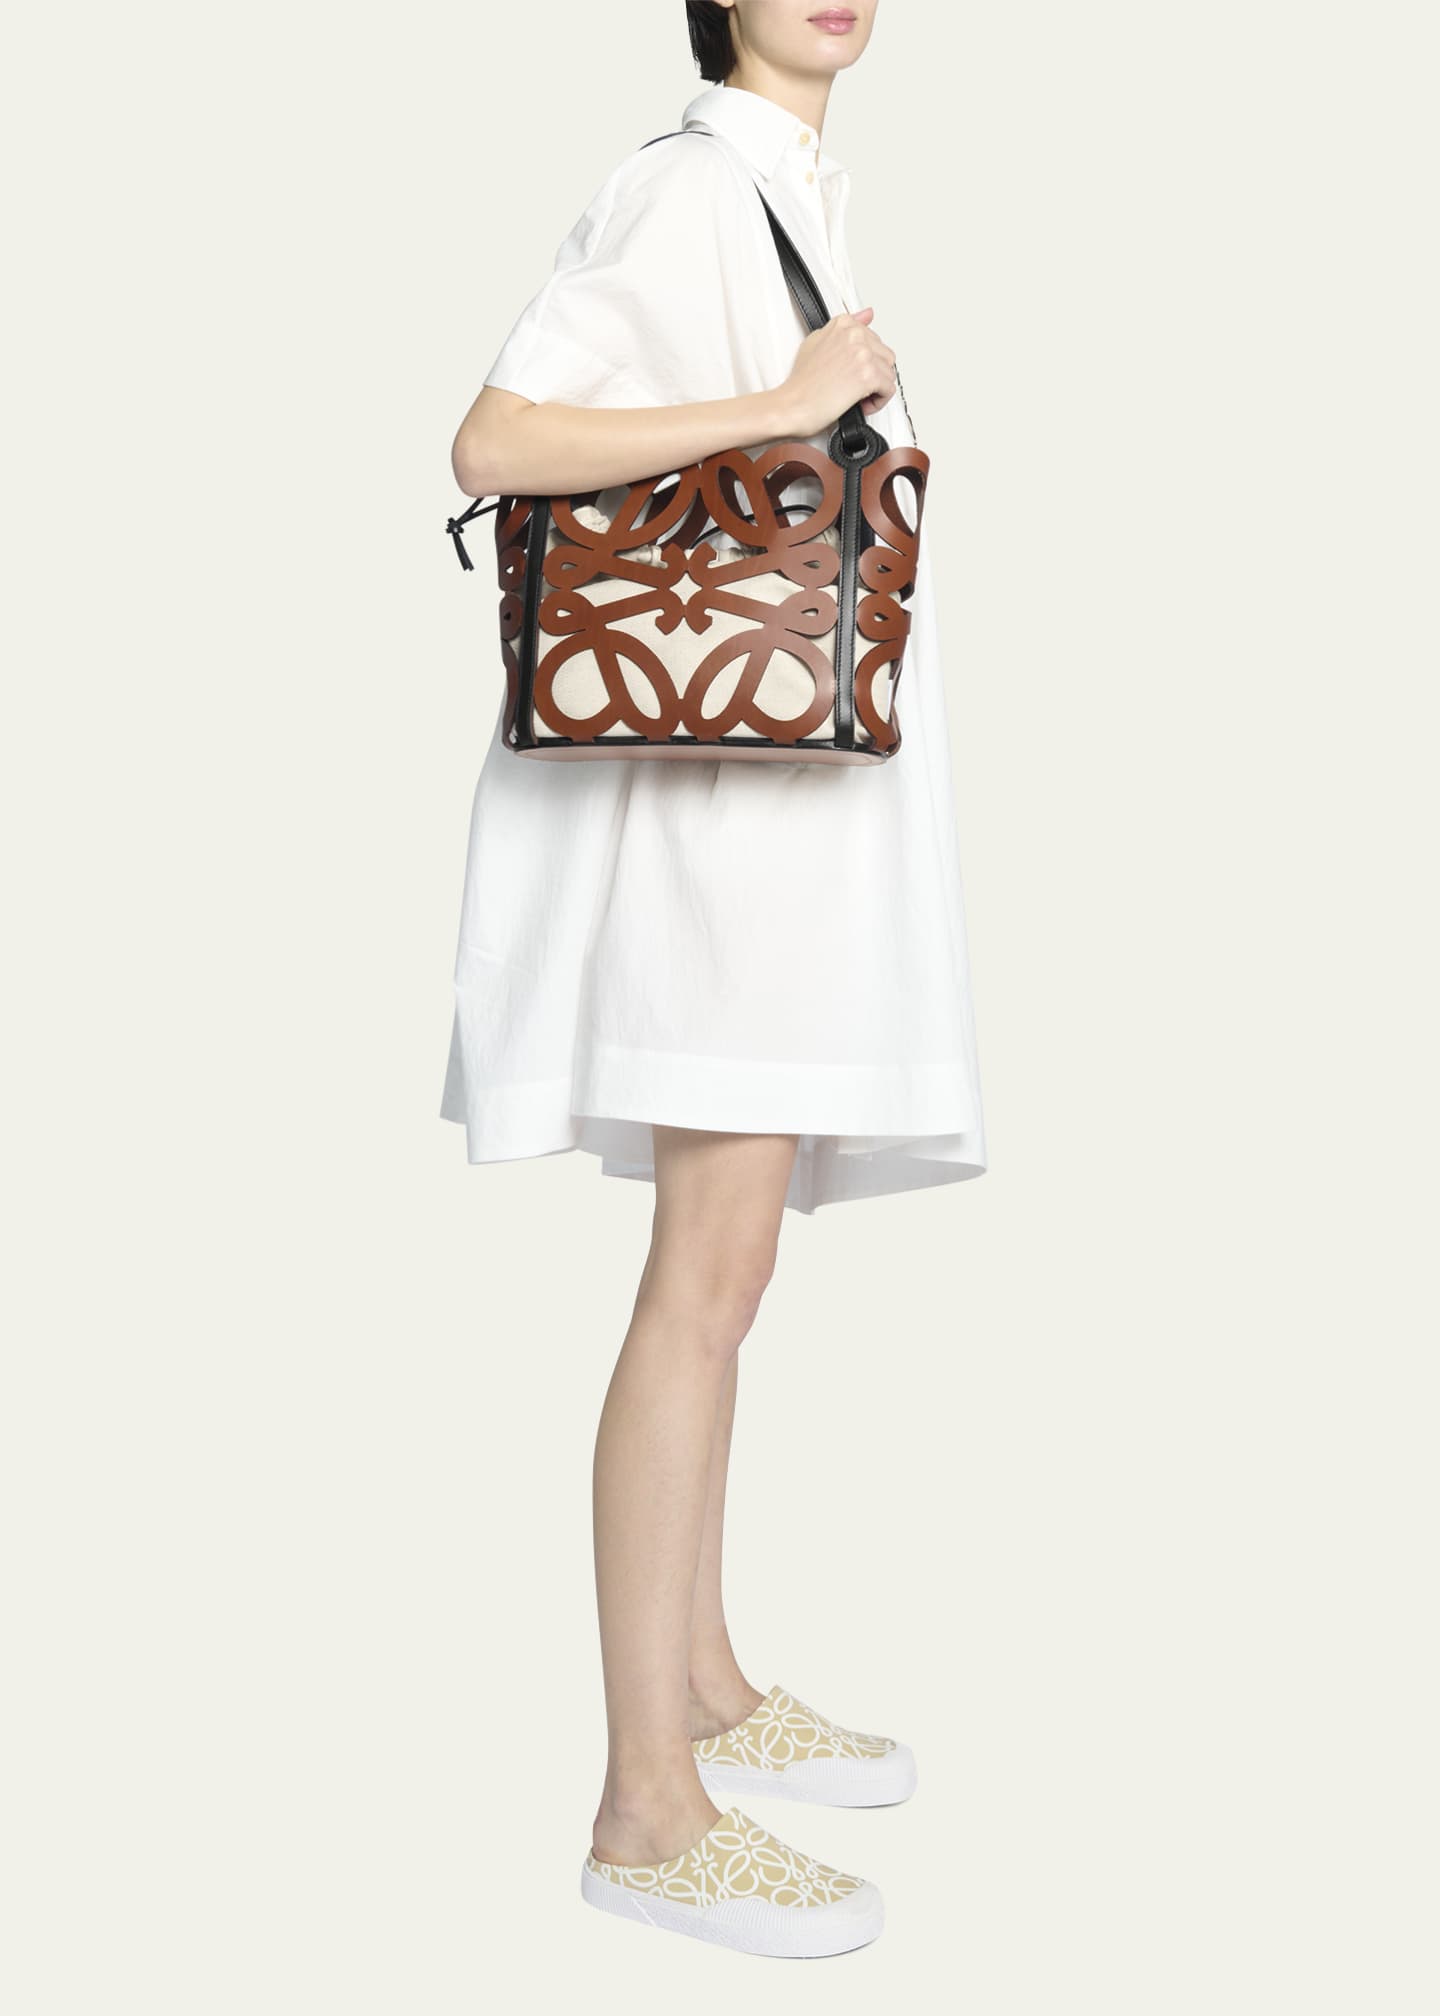 Loewe Anagram Small Cutout Leather Tote